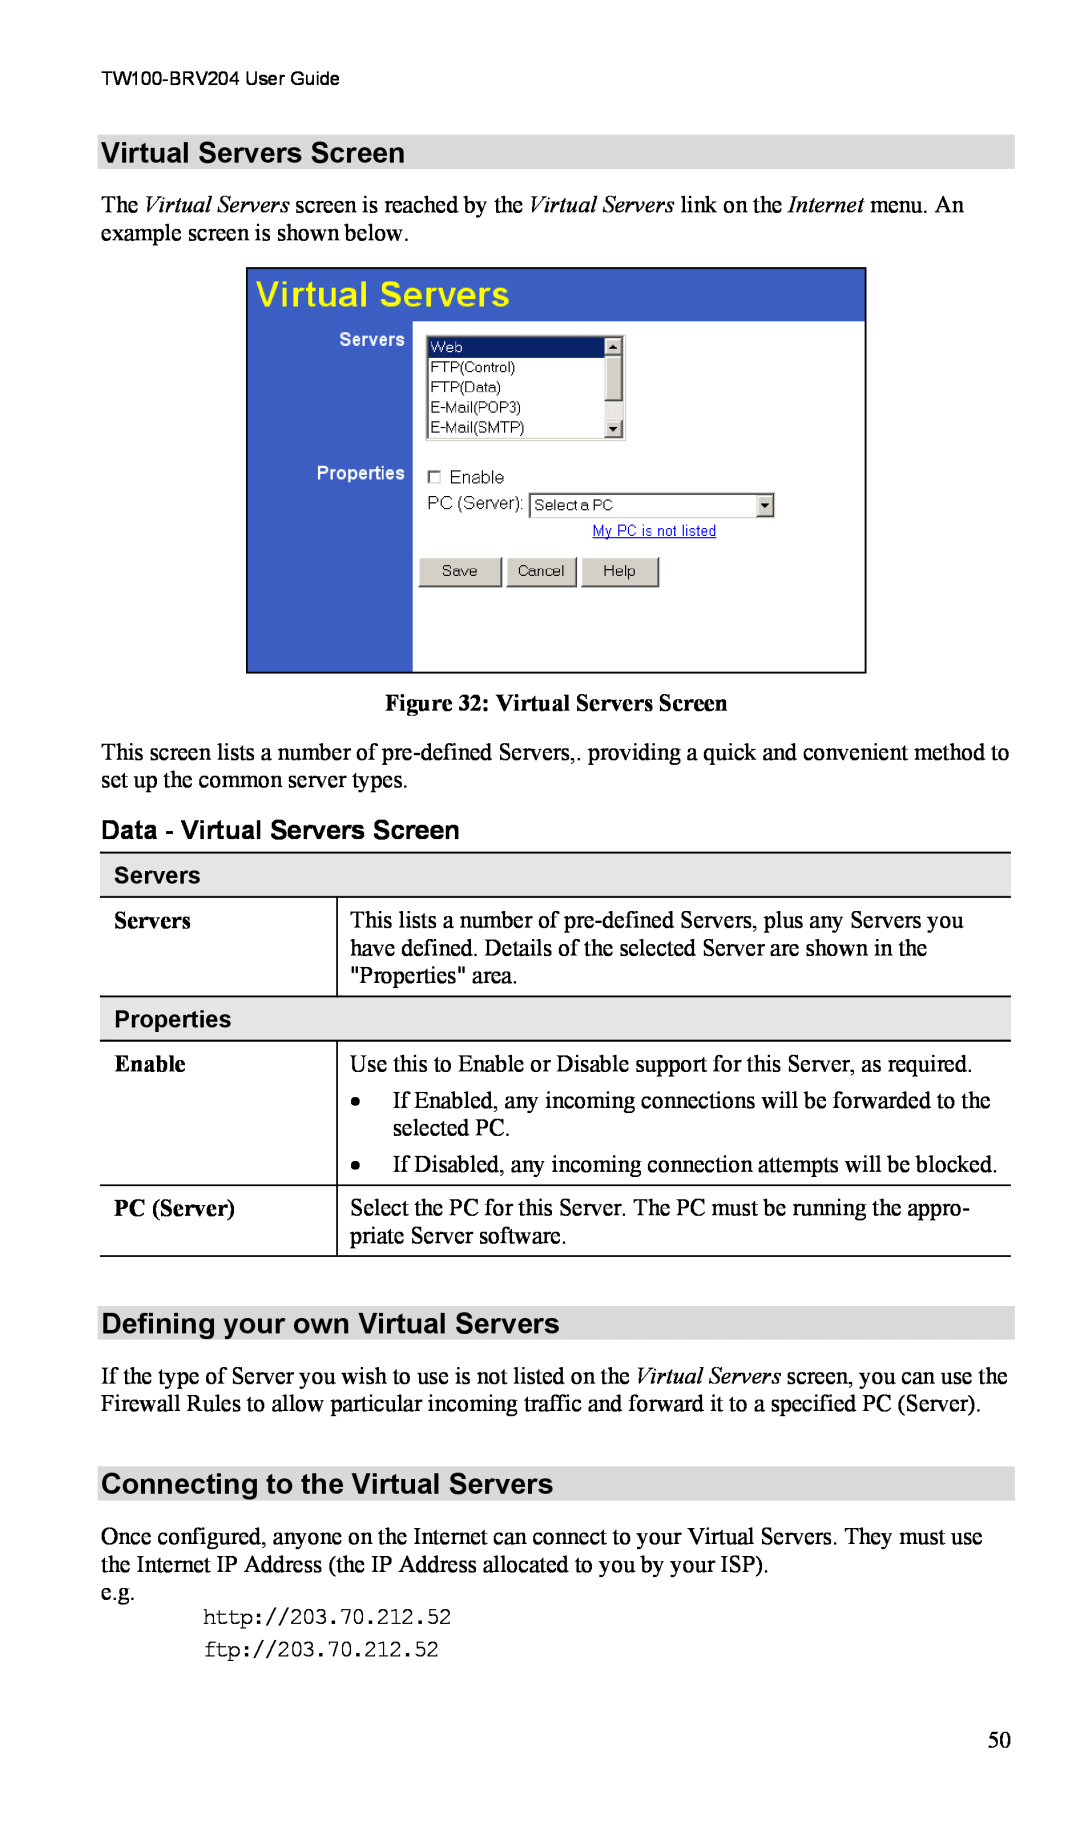 TRENDnet VPN Firewall Router Virtual Servers Screen, Defining your own Virtual Servers, Connecting to the Virtual Servers 